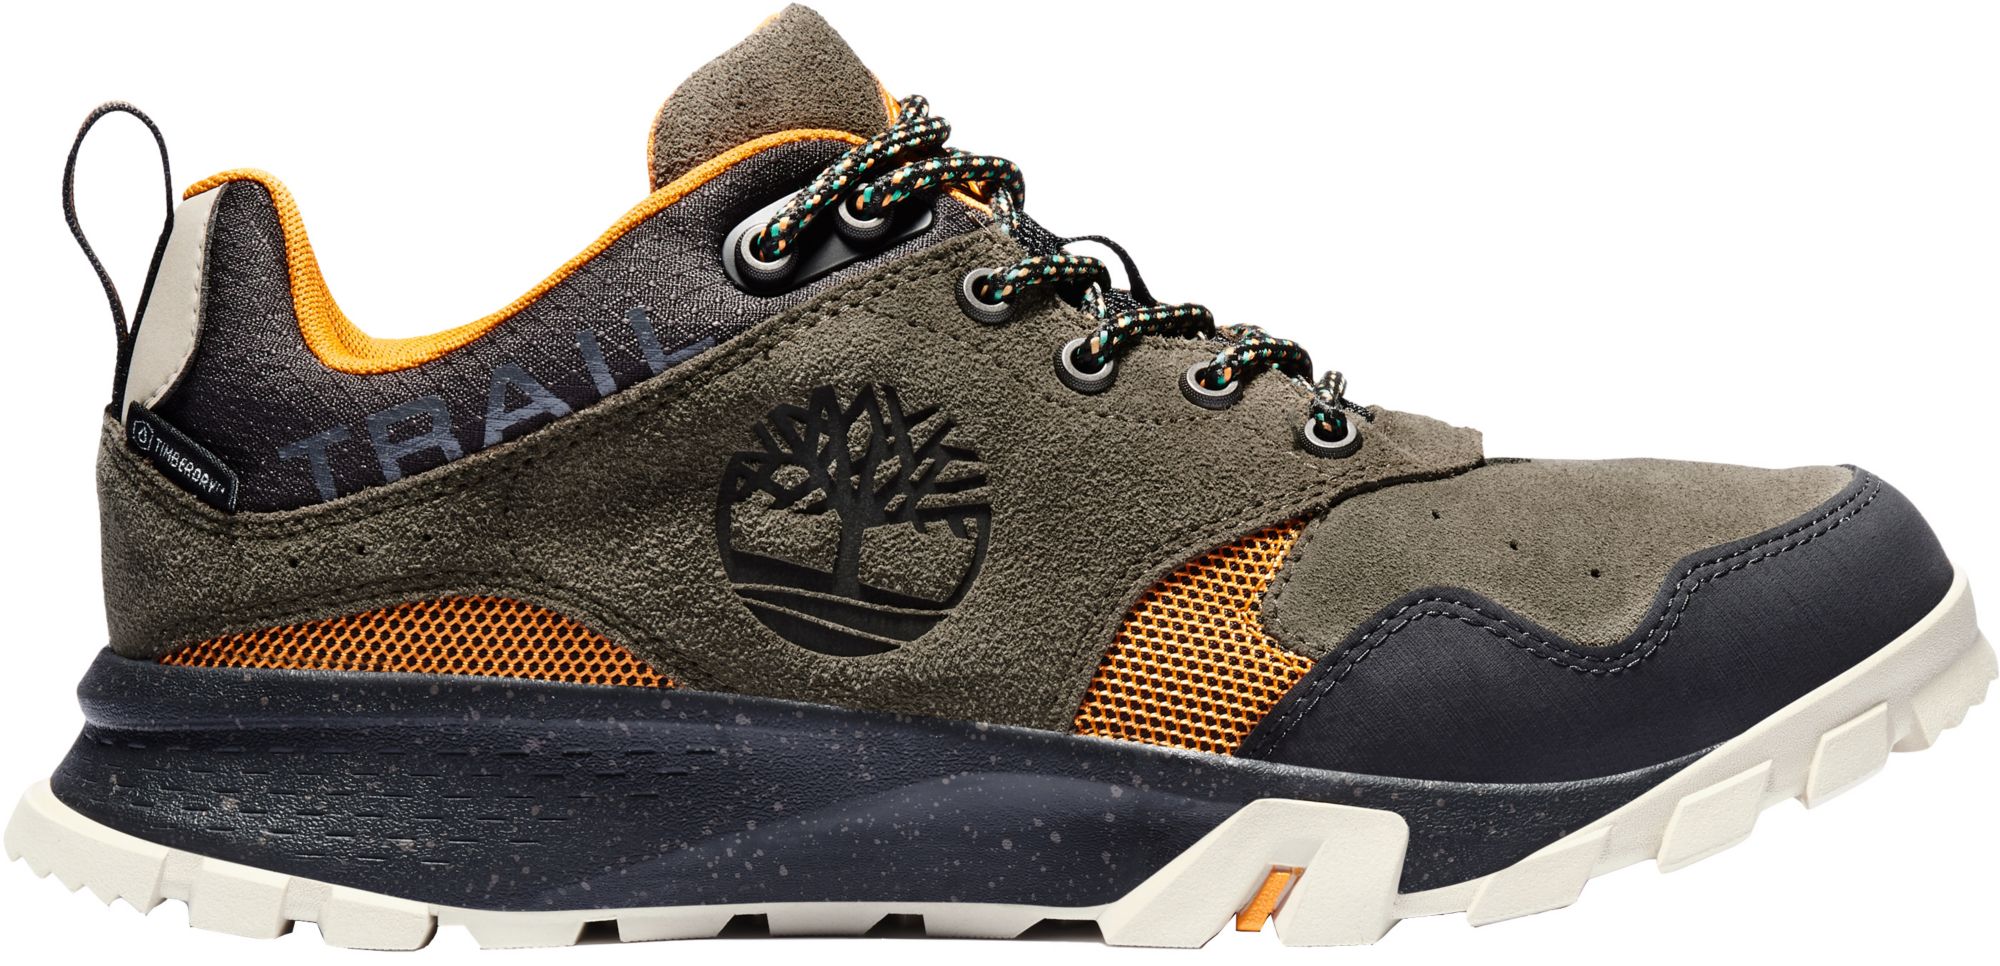 timberland trail shoes